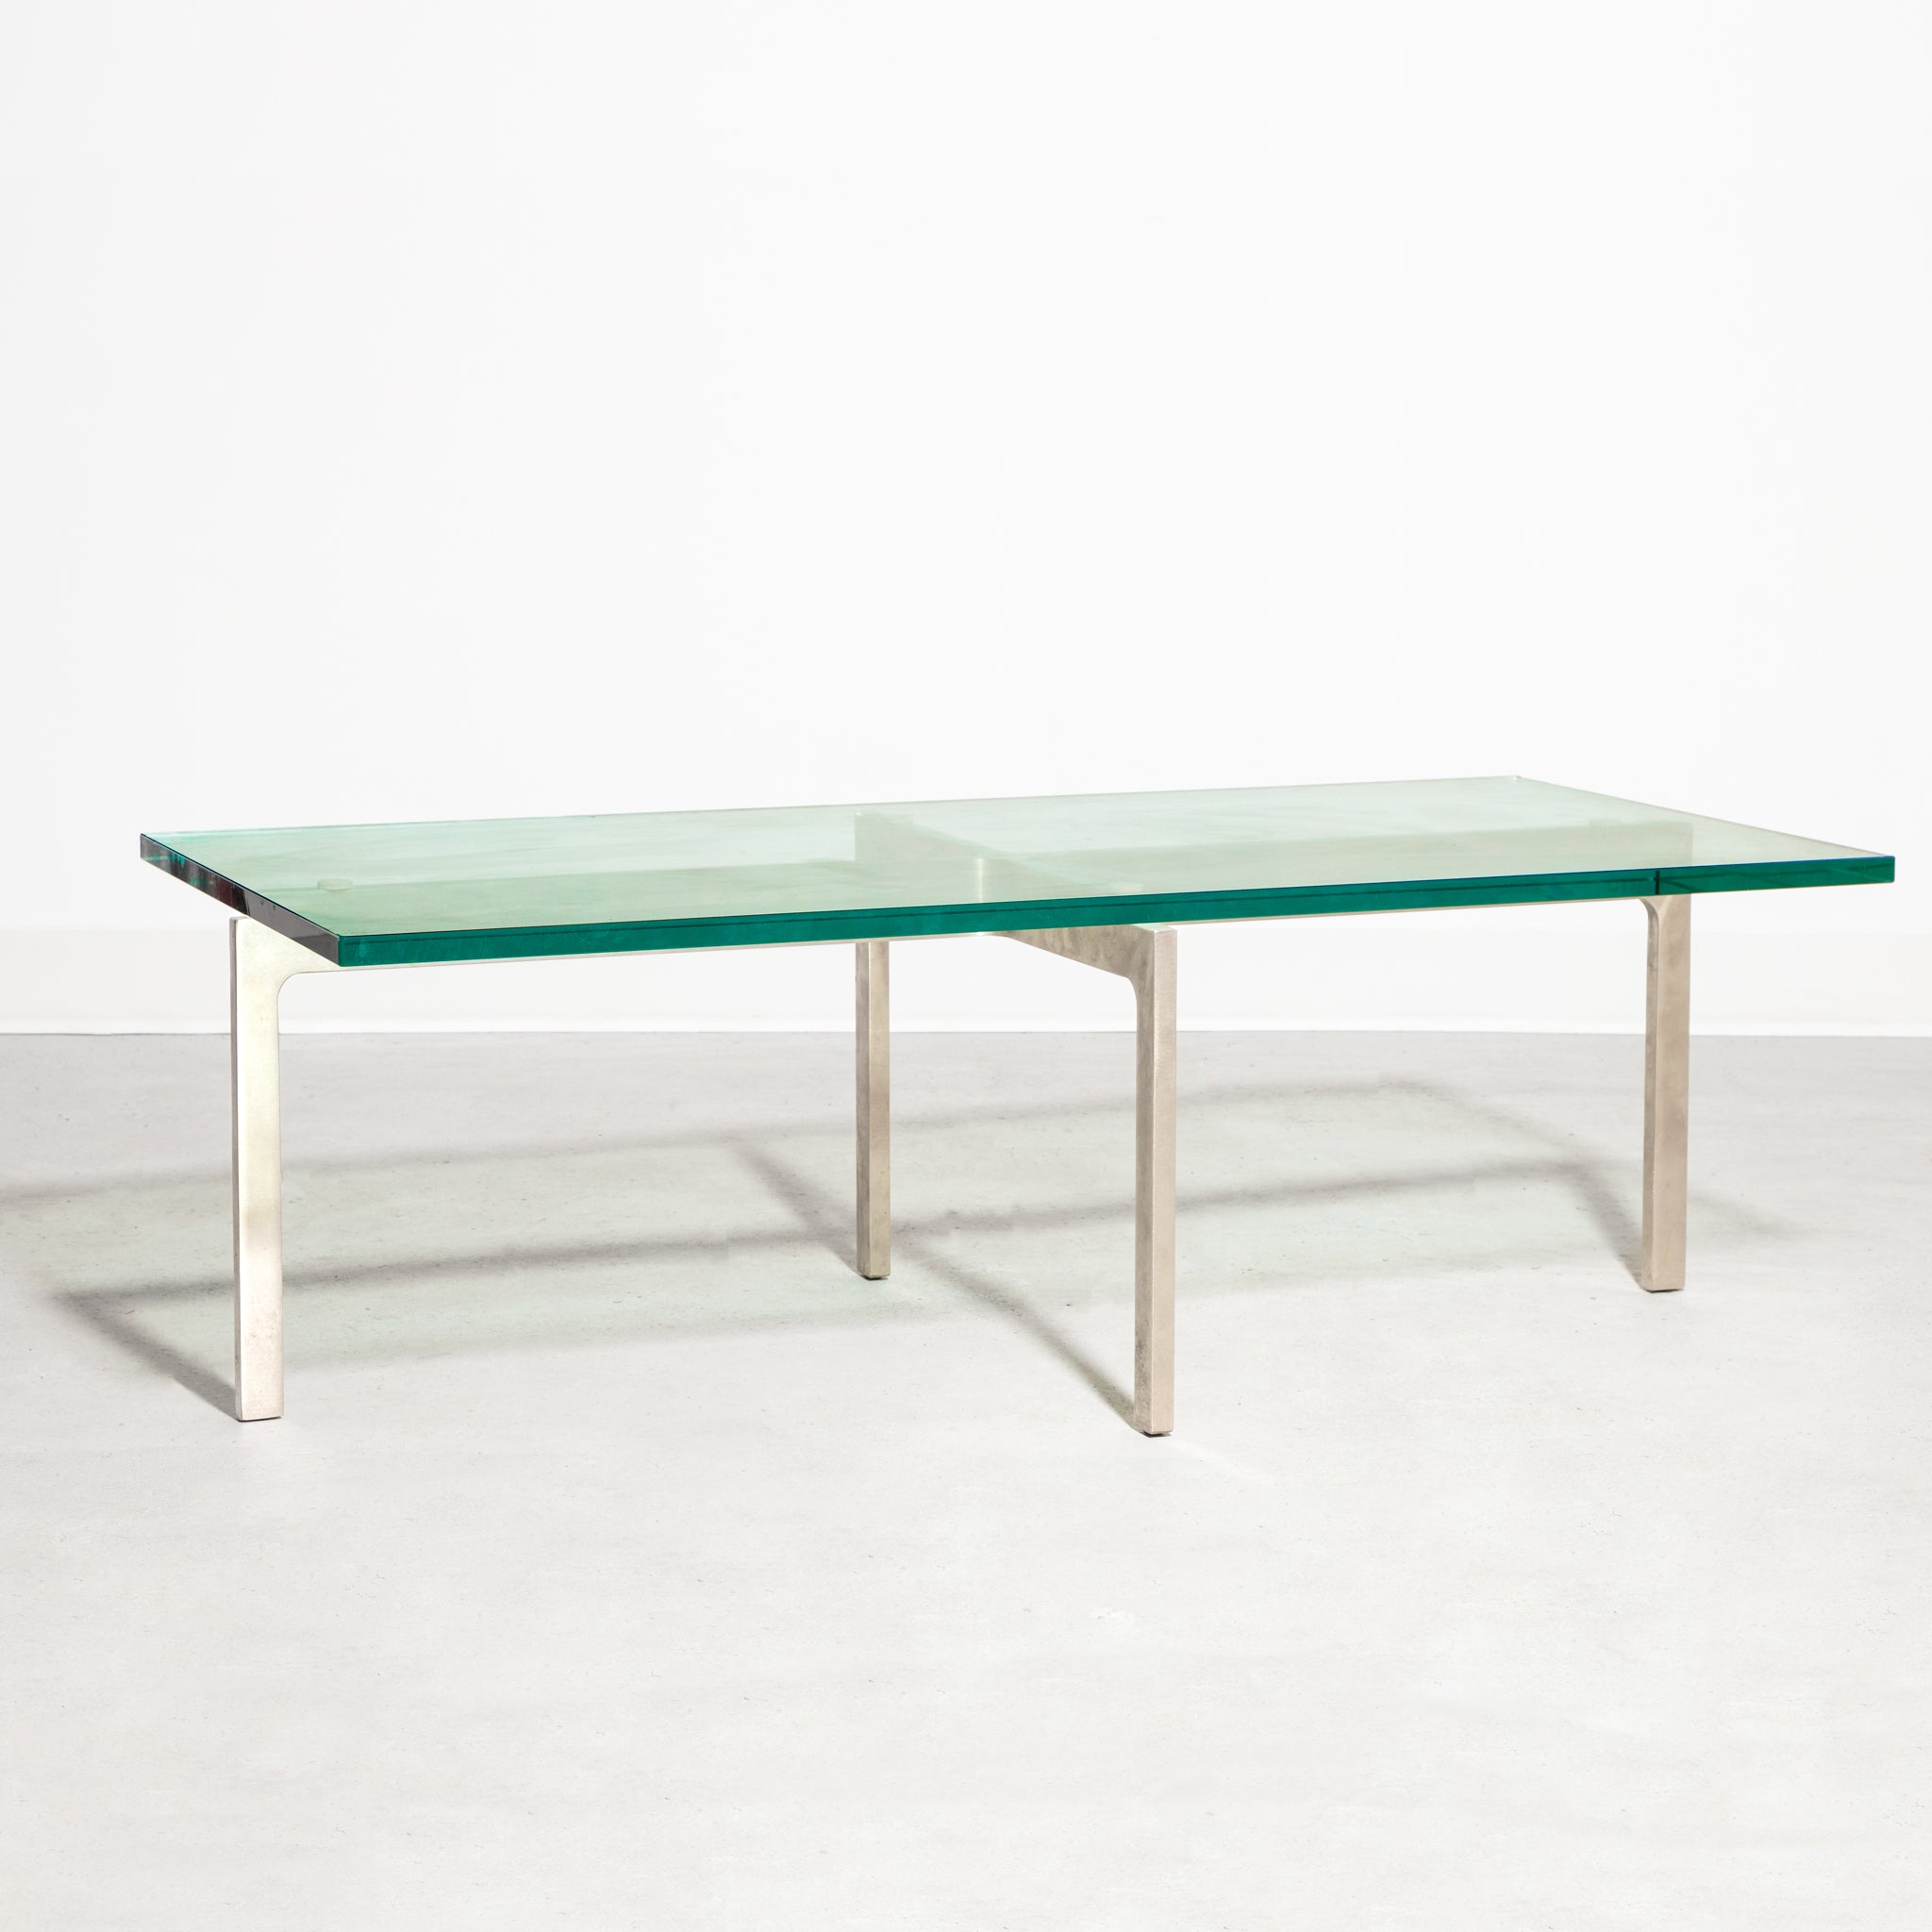 Keilhauer Glass Coffee Table with tempered glass top and steel base with nickel plated finish